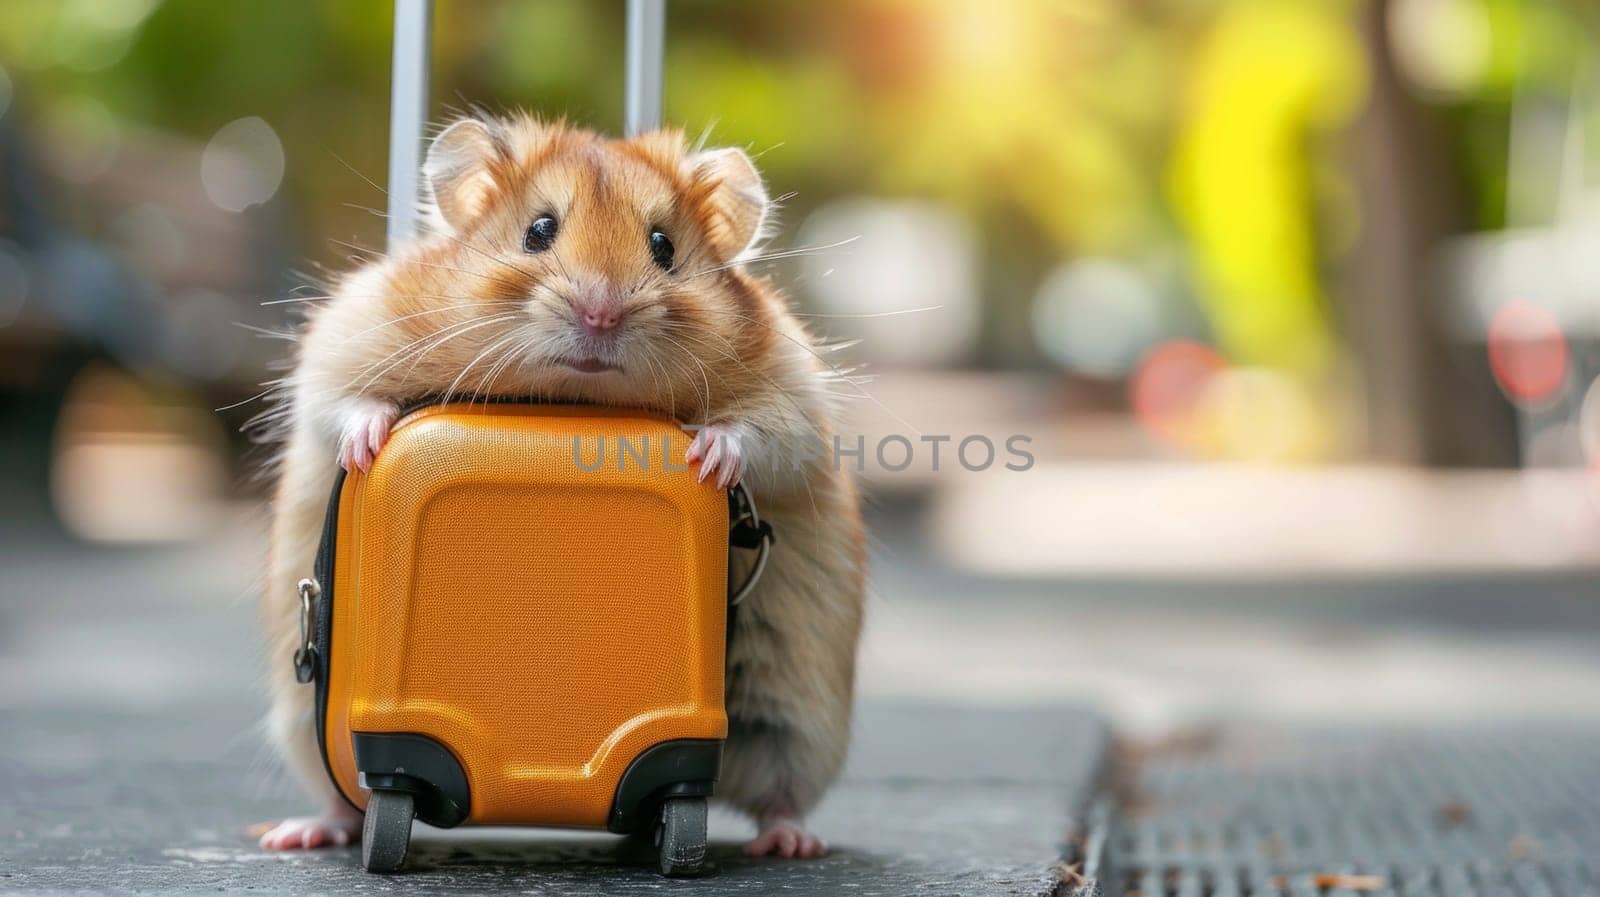 A hamster with a suitcase on its back and holding onto it